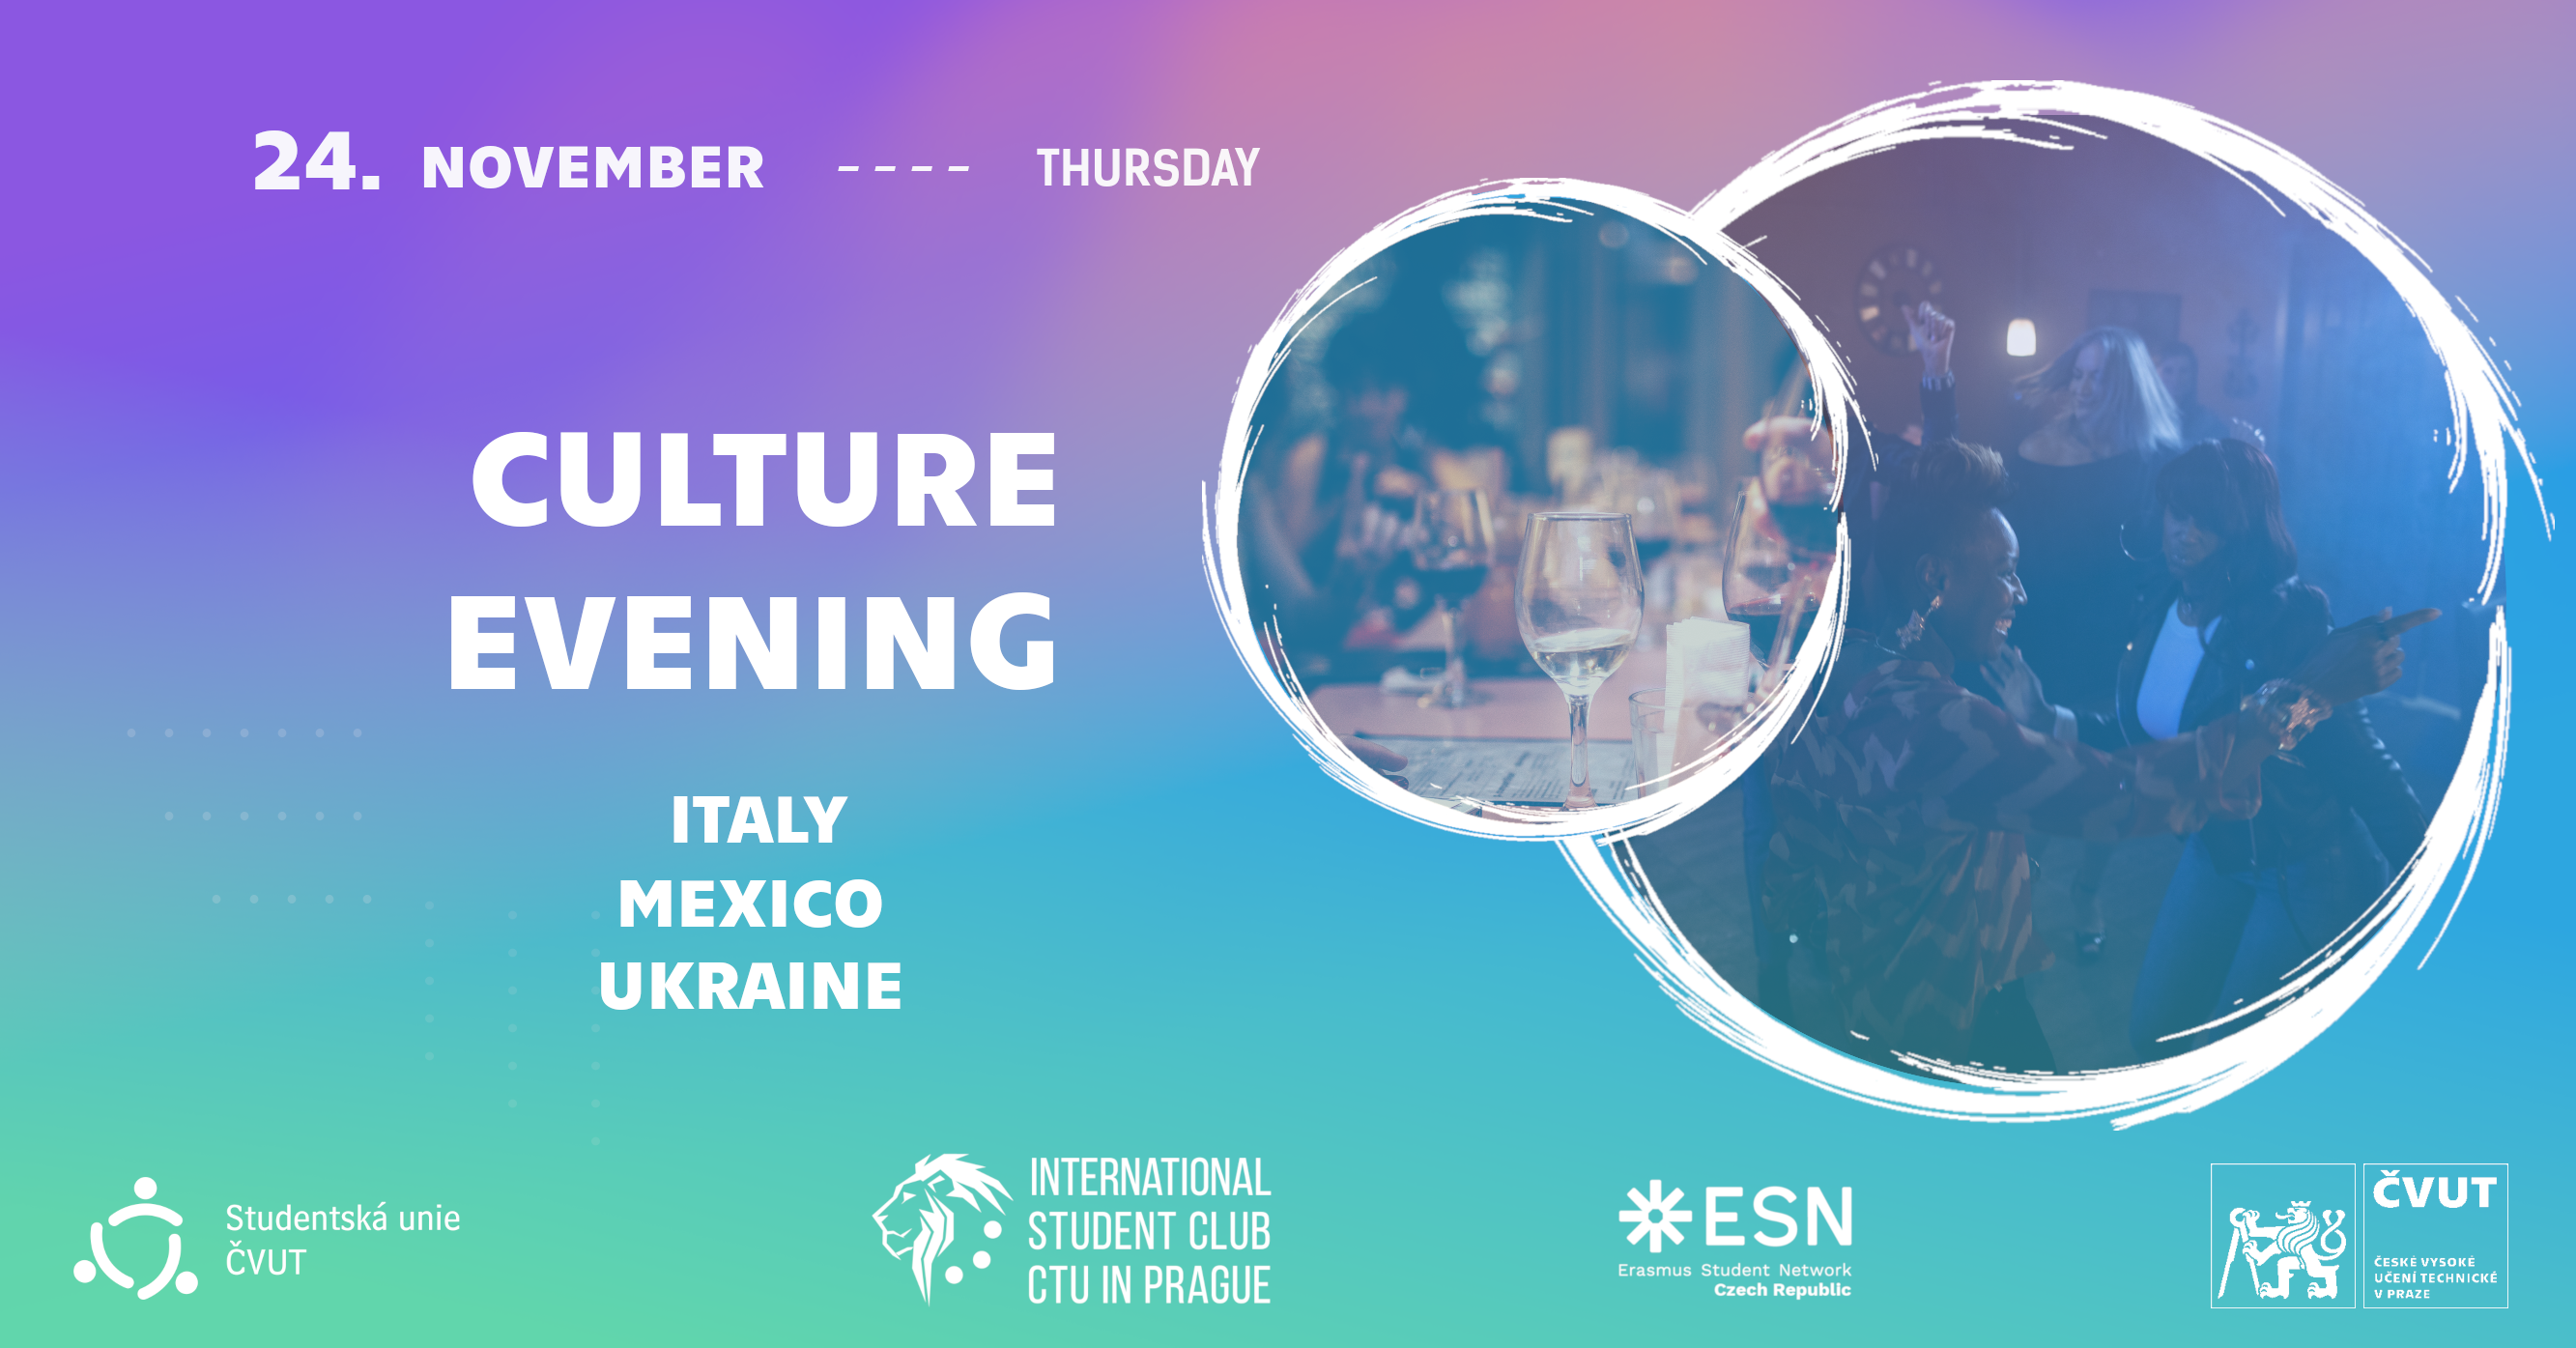 ISC Italy, Mexico and Ukraine Culture Evening